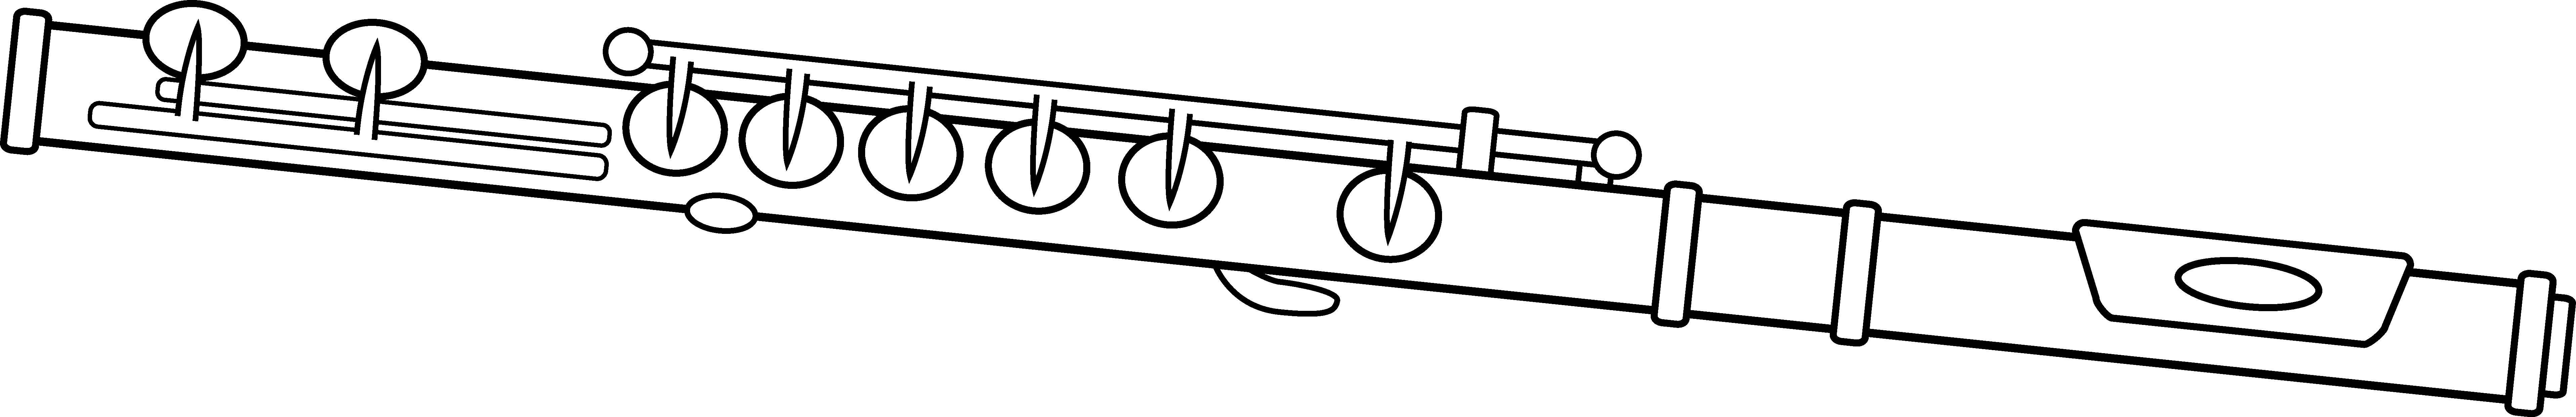 Xylophone clipart black and white. Flute design free clip